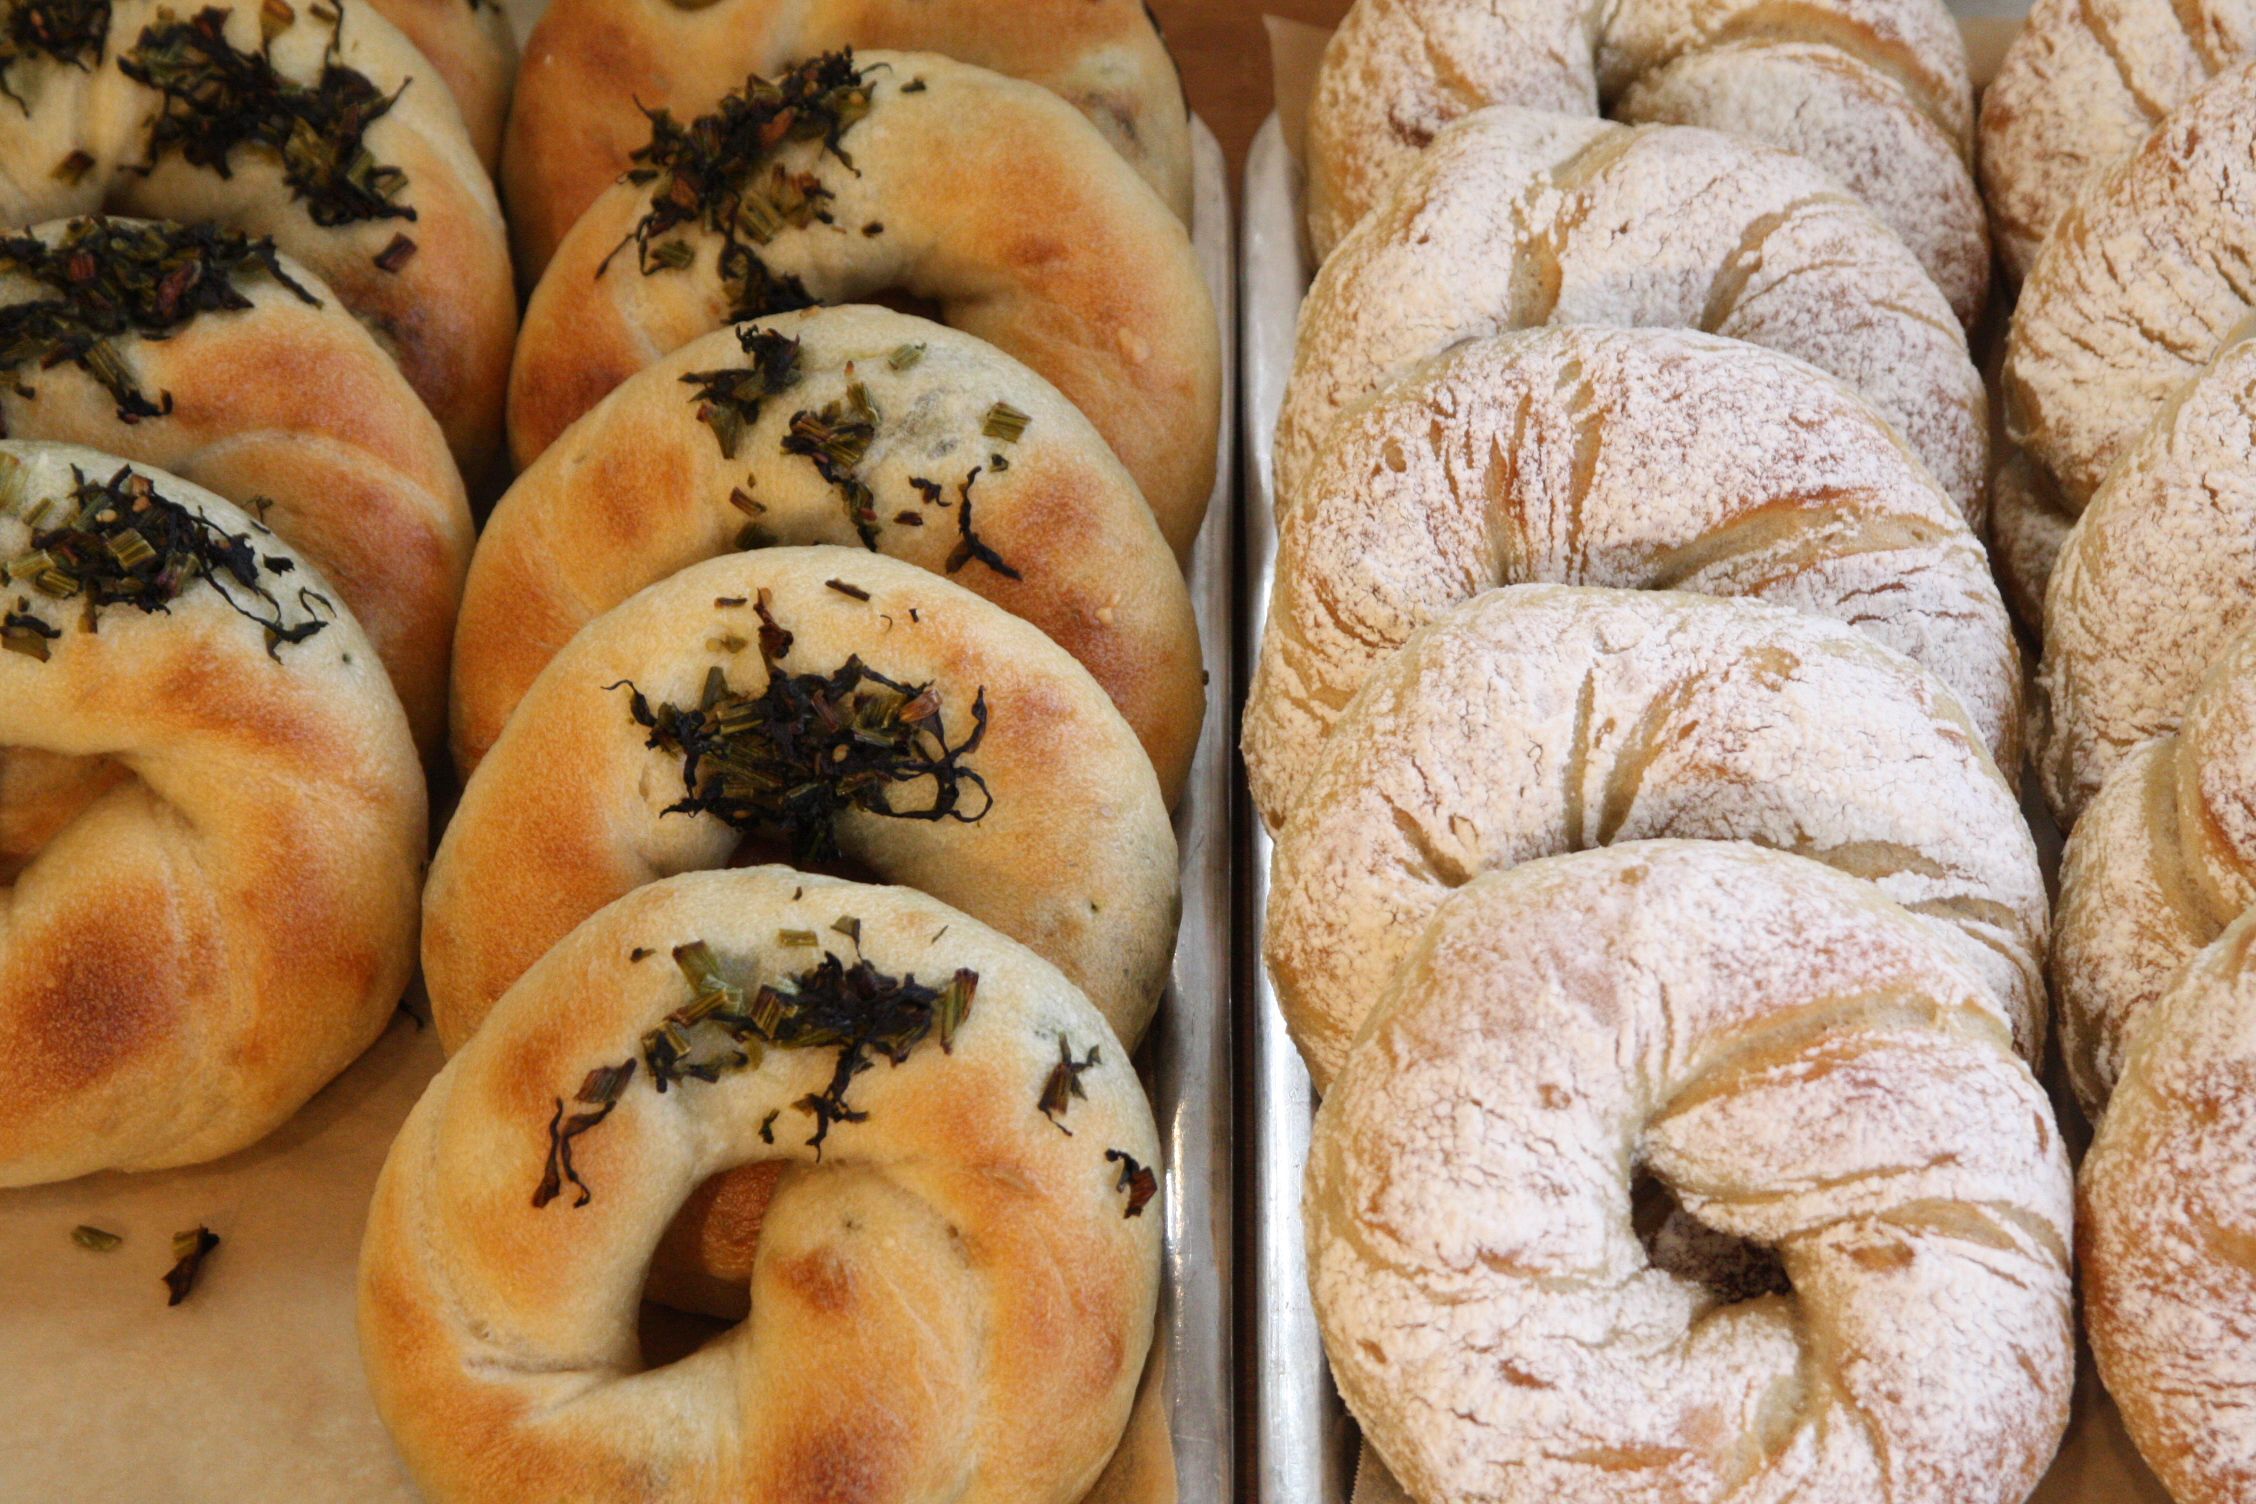 WA-BAGEL by Aburi is bringing airy and chewy Japanese style bagels to Downtown Vancouver